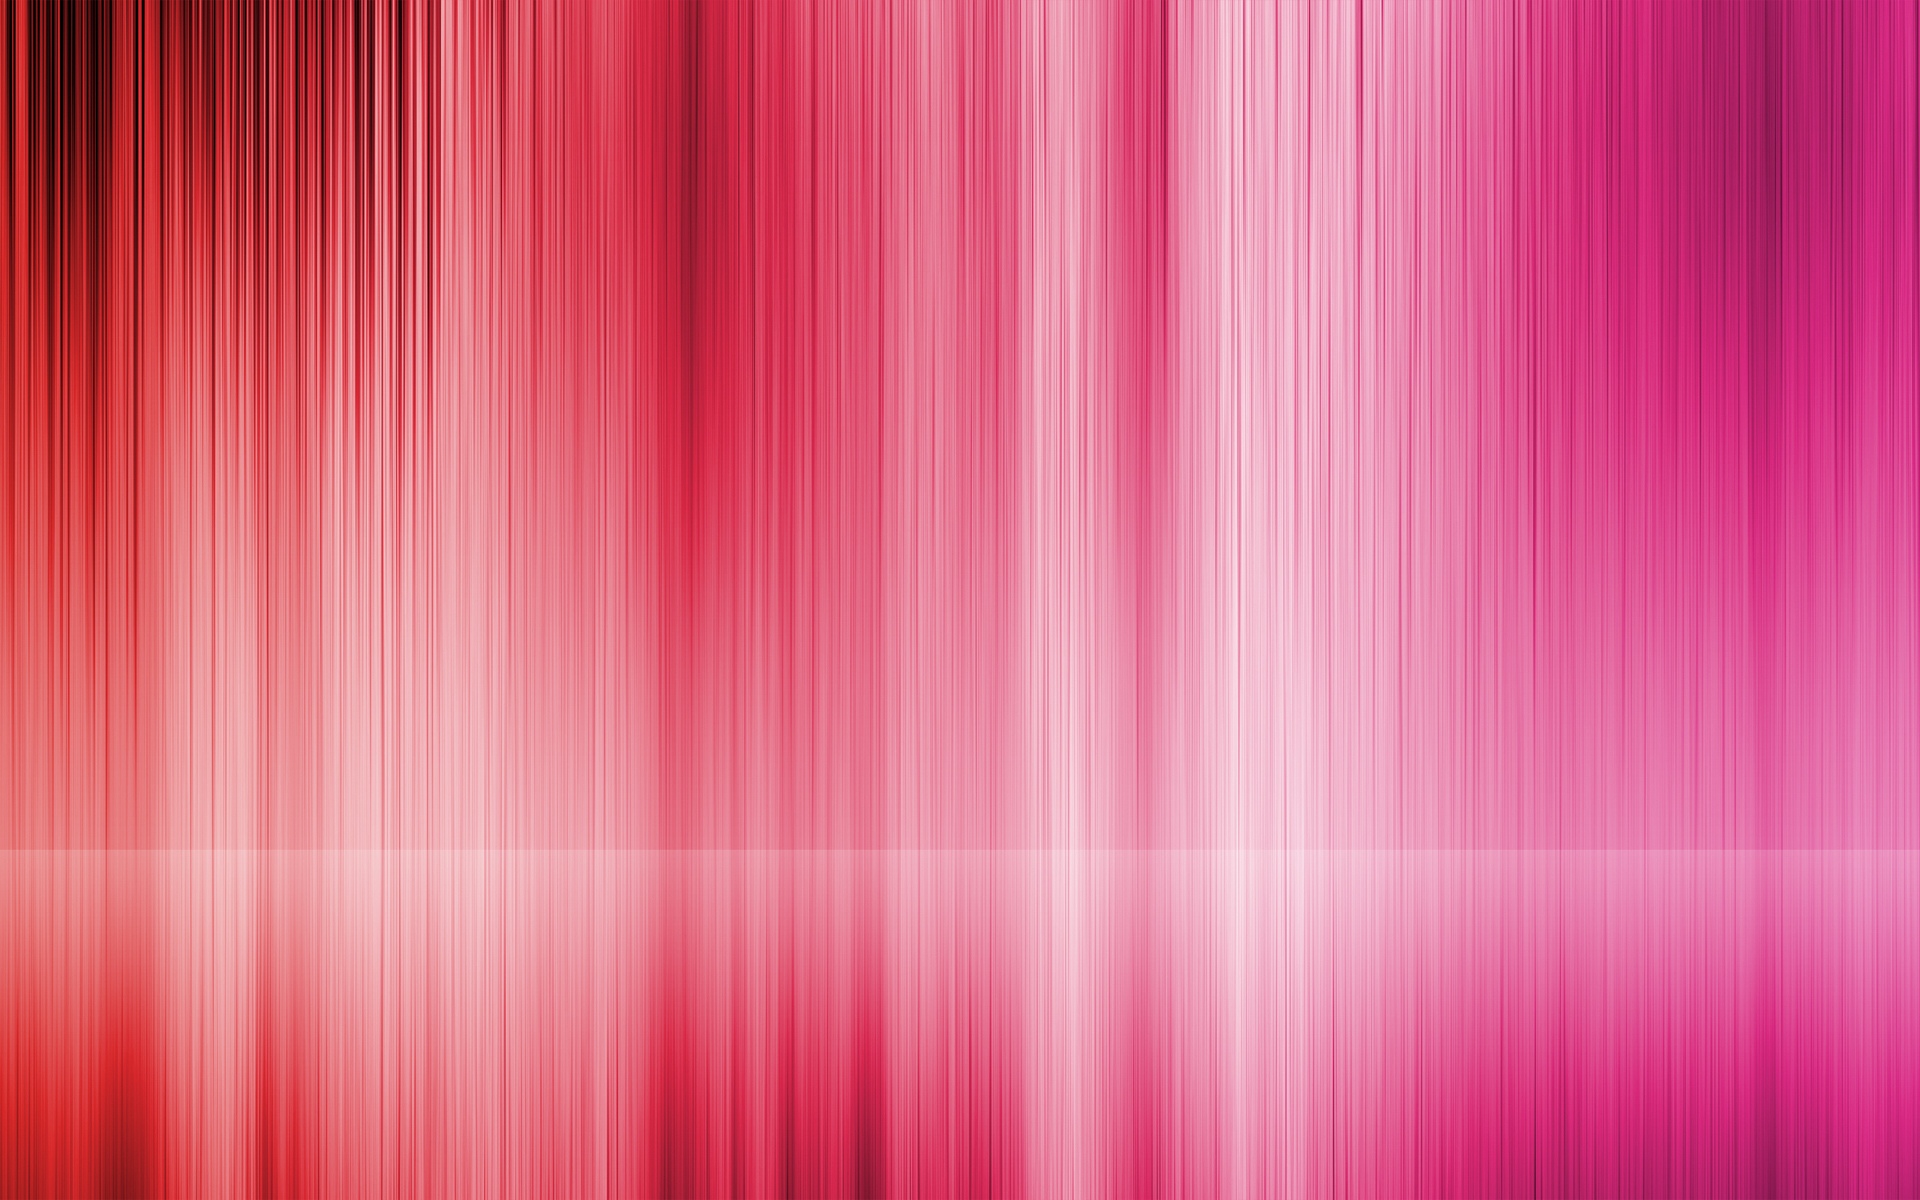 6375783 Red Pink Background Images Stock Photos  Vectors  Shutterstock